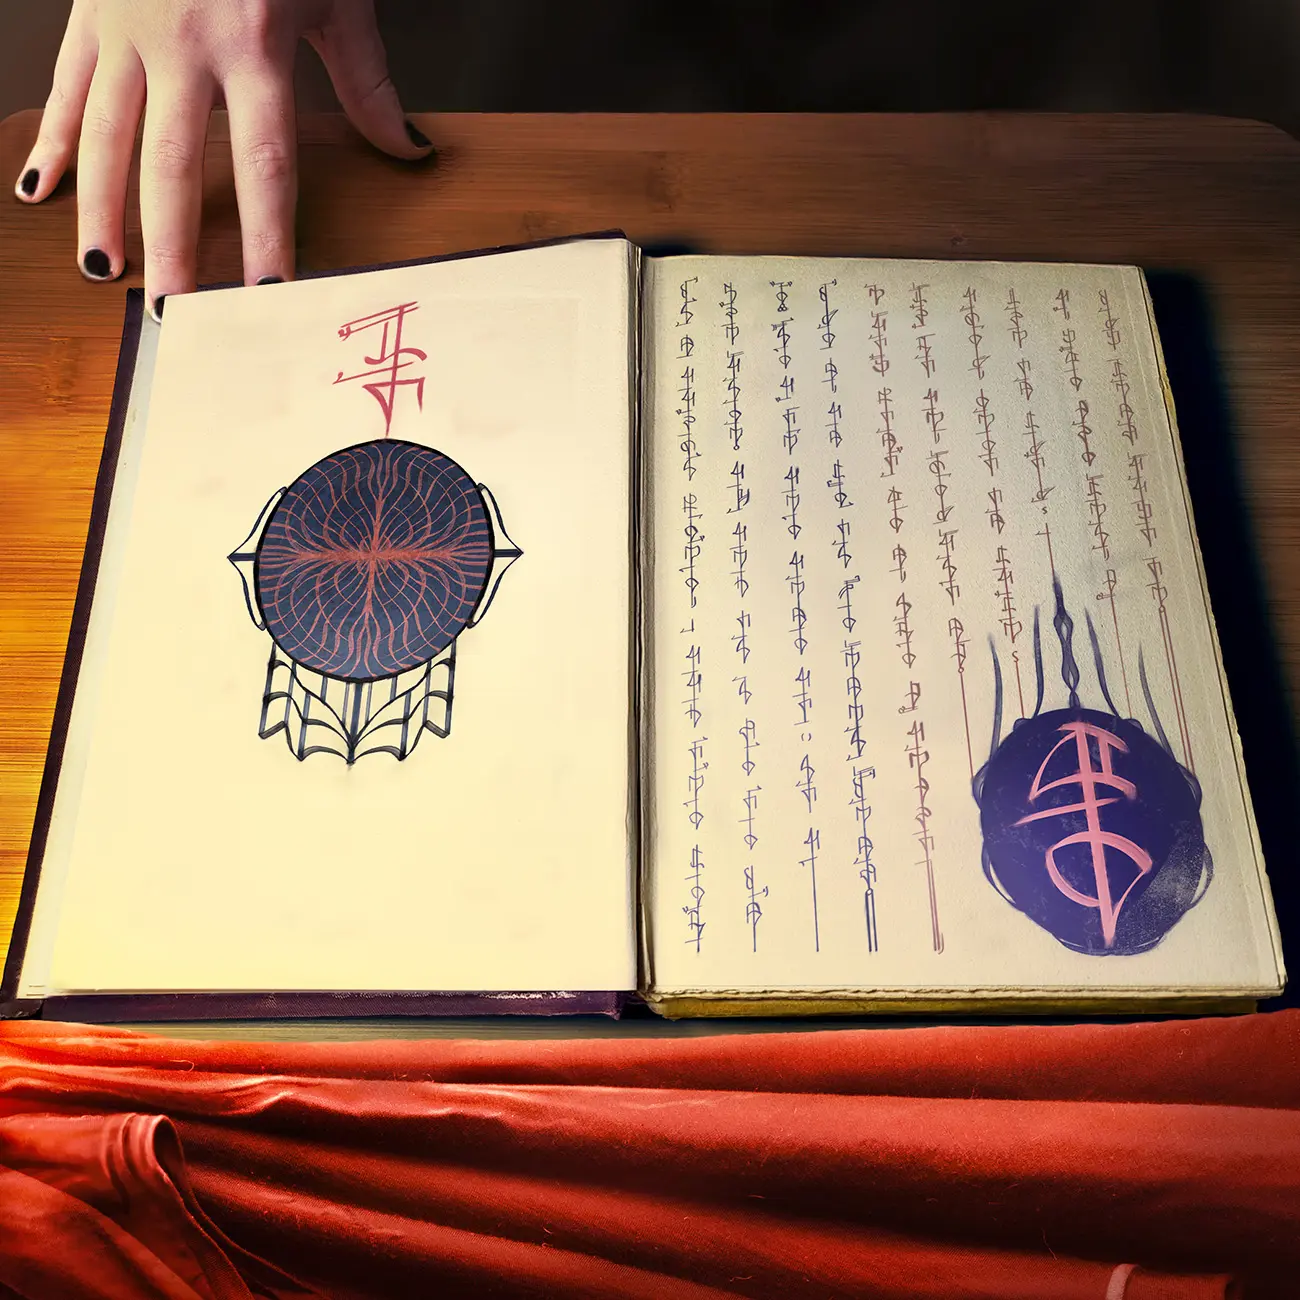 An old, esoteric-looking book full of the ancient script Najath rests on a bamboo table.